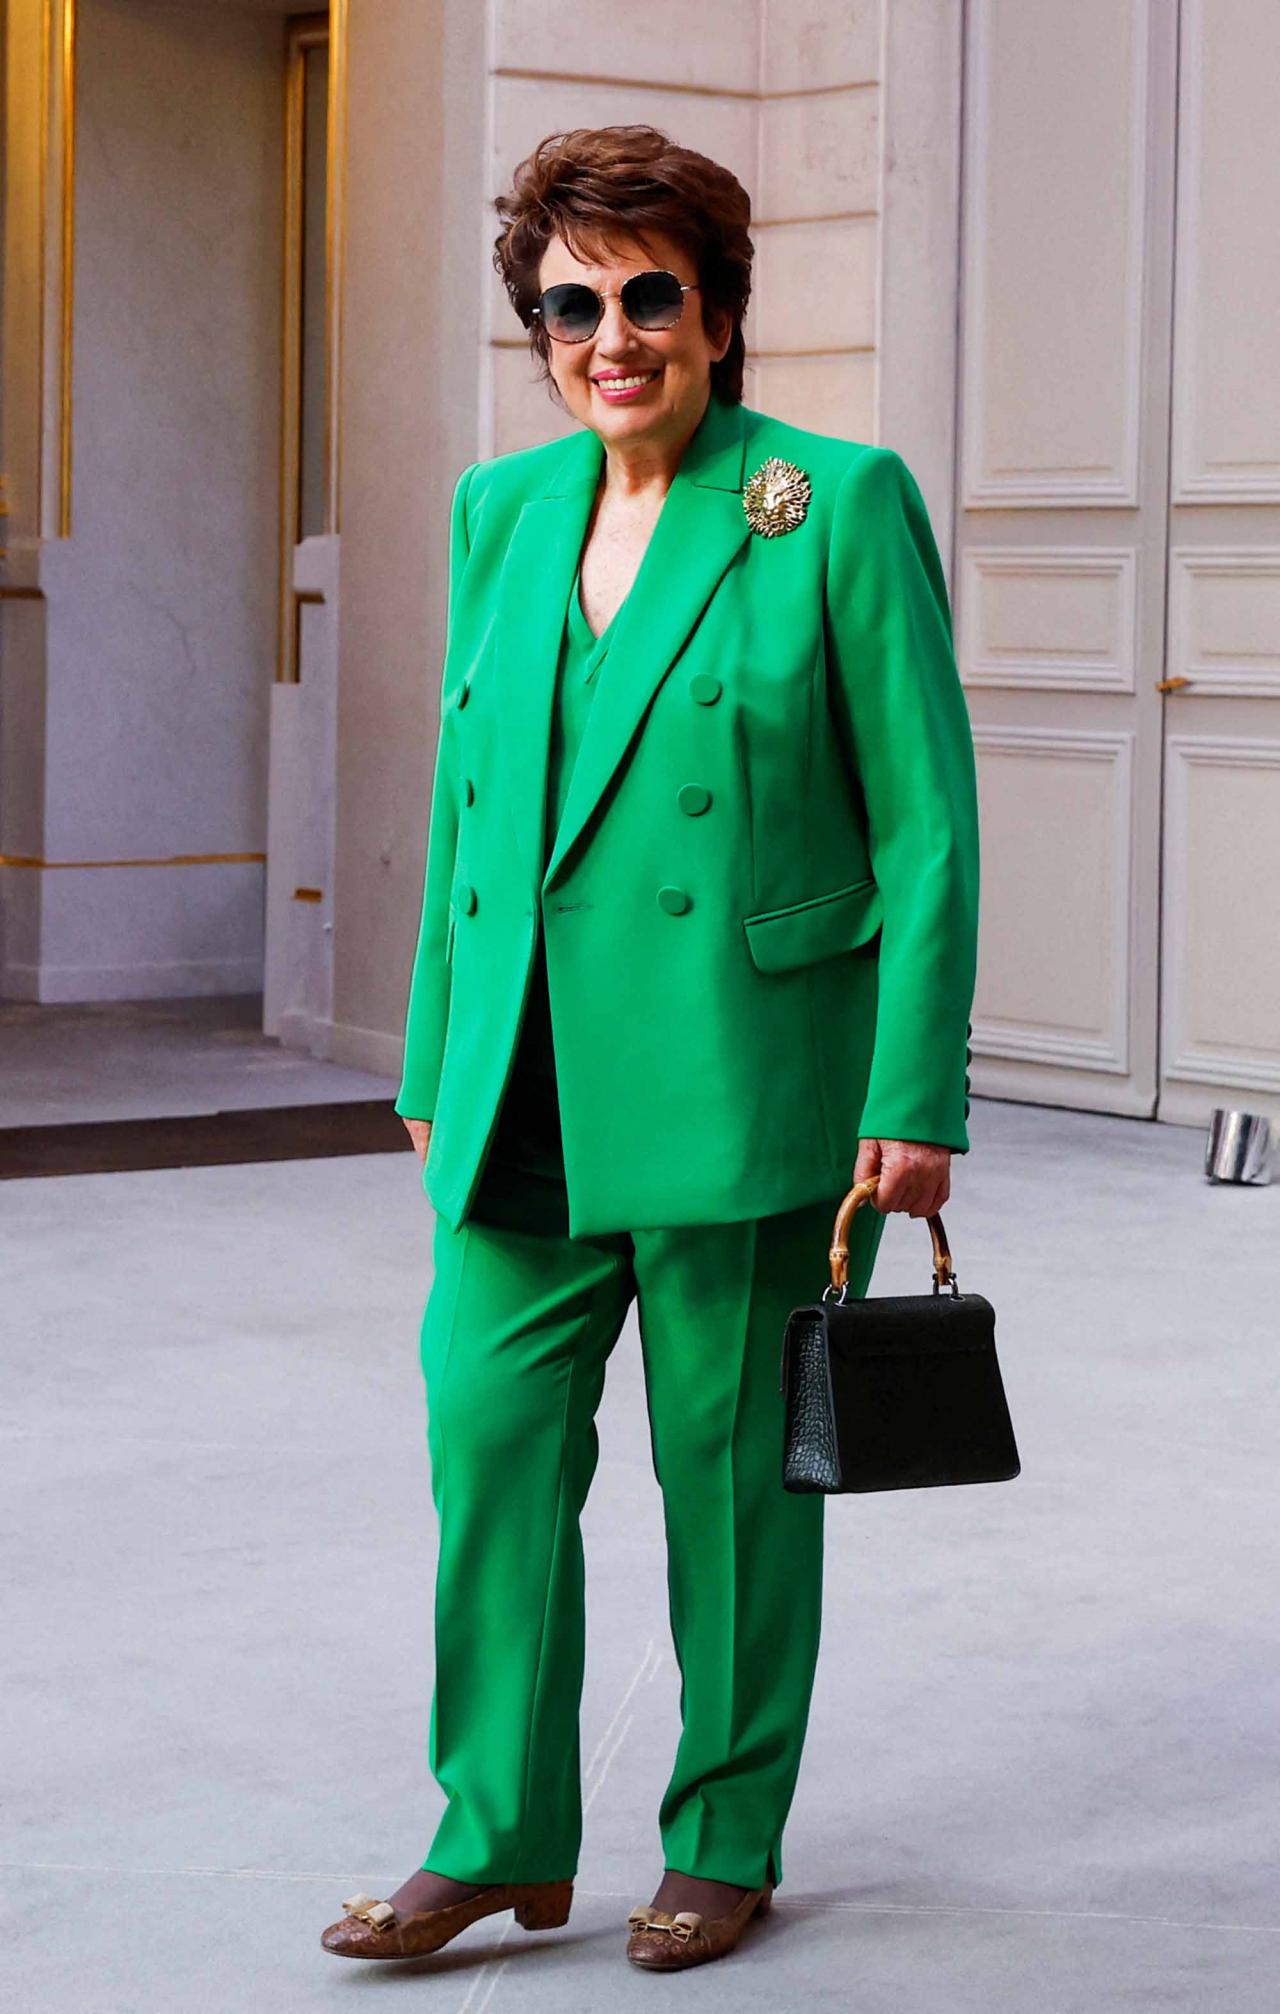 France's Culture Minister Roselyne Bachelot arrives at the Elysee presidential palace in Paris on May 7, 2022, to attend the investiture ceremony of Emmanuel Macron as French President, following his re-election last April 24. (Photo by GONZALO FUENTES / POOL / AFP)